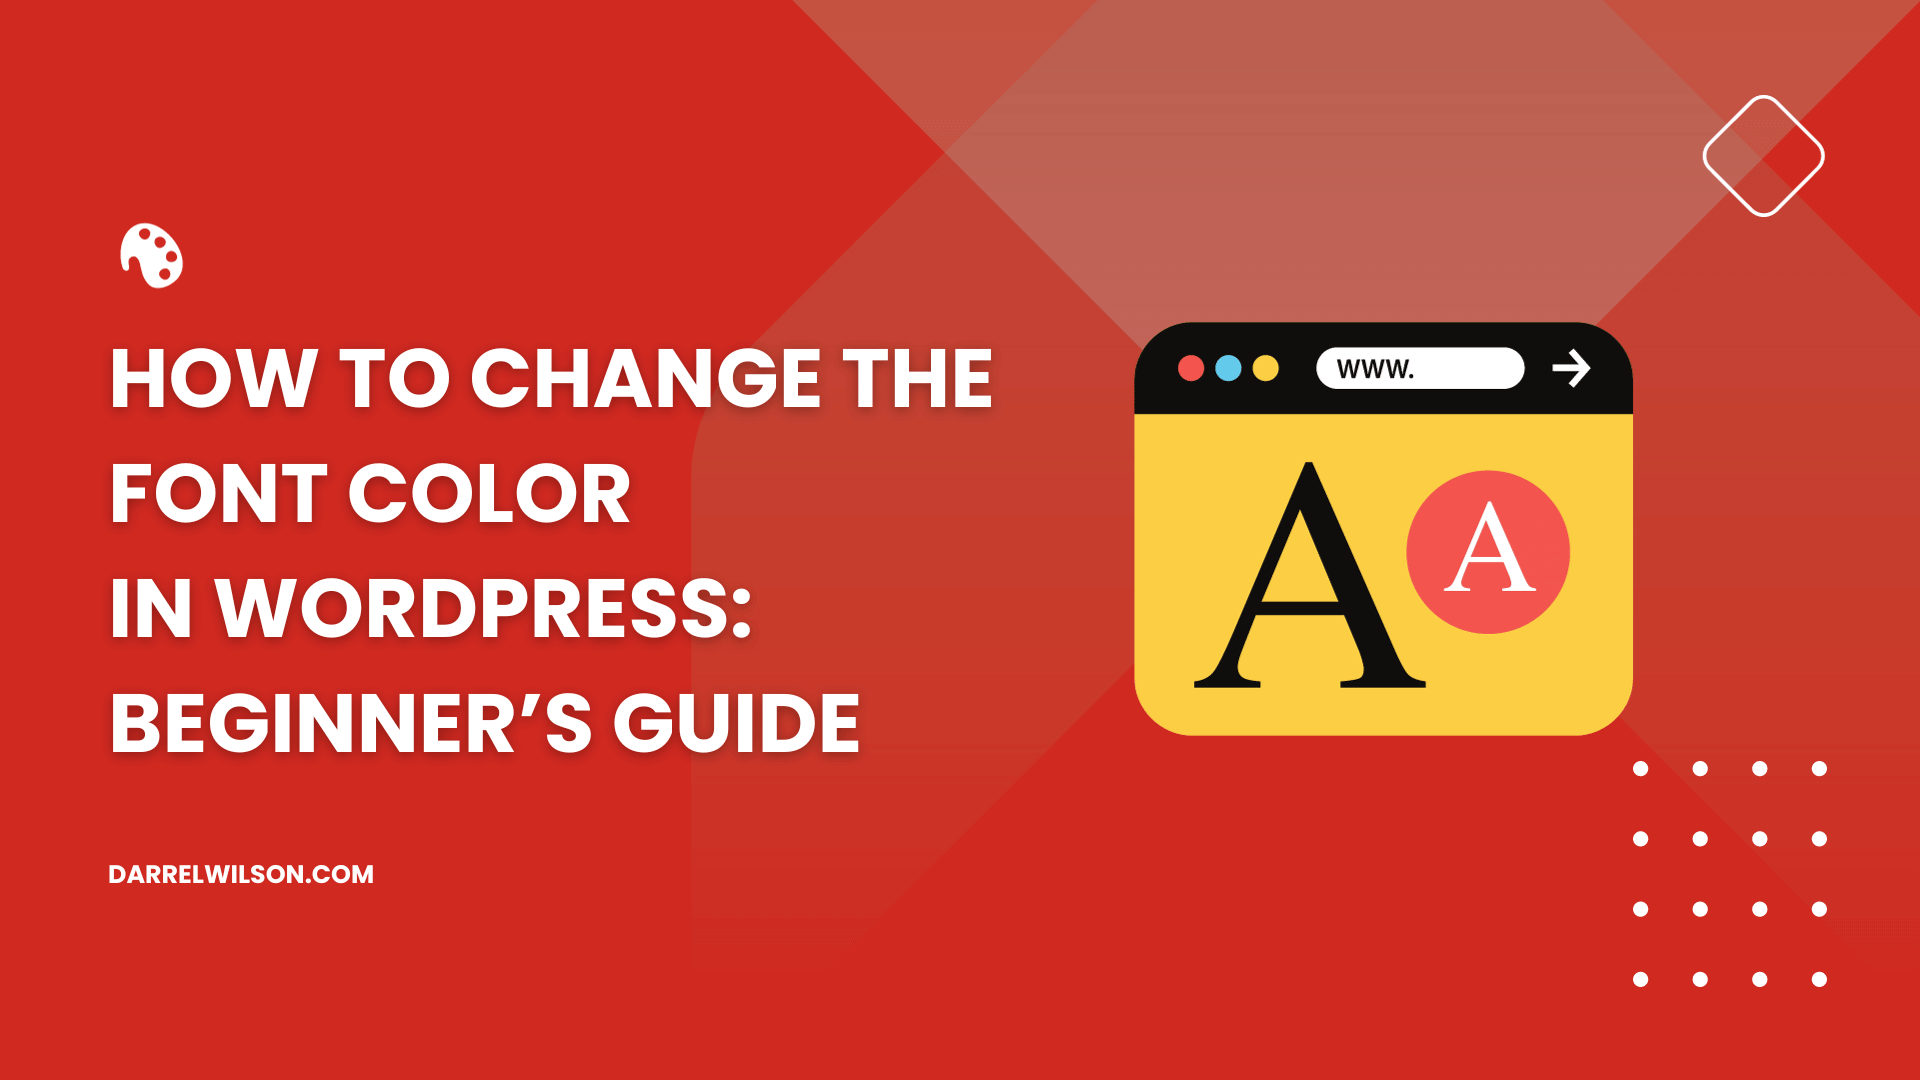 How to Change the Font Color in WordPress: Beginner’s Guide